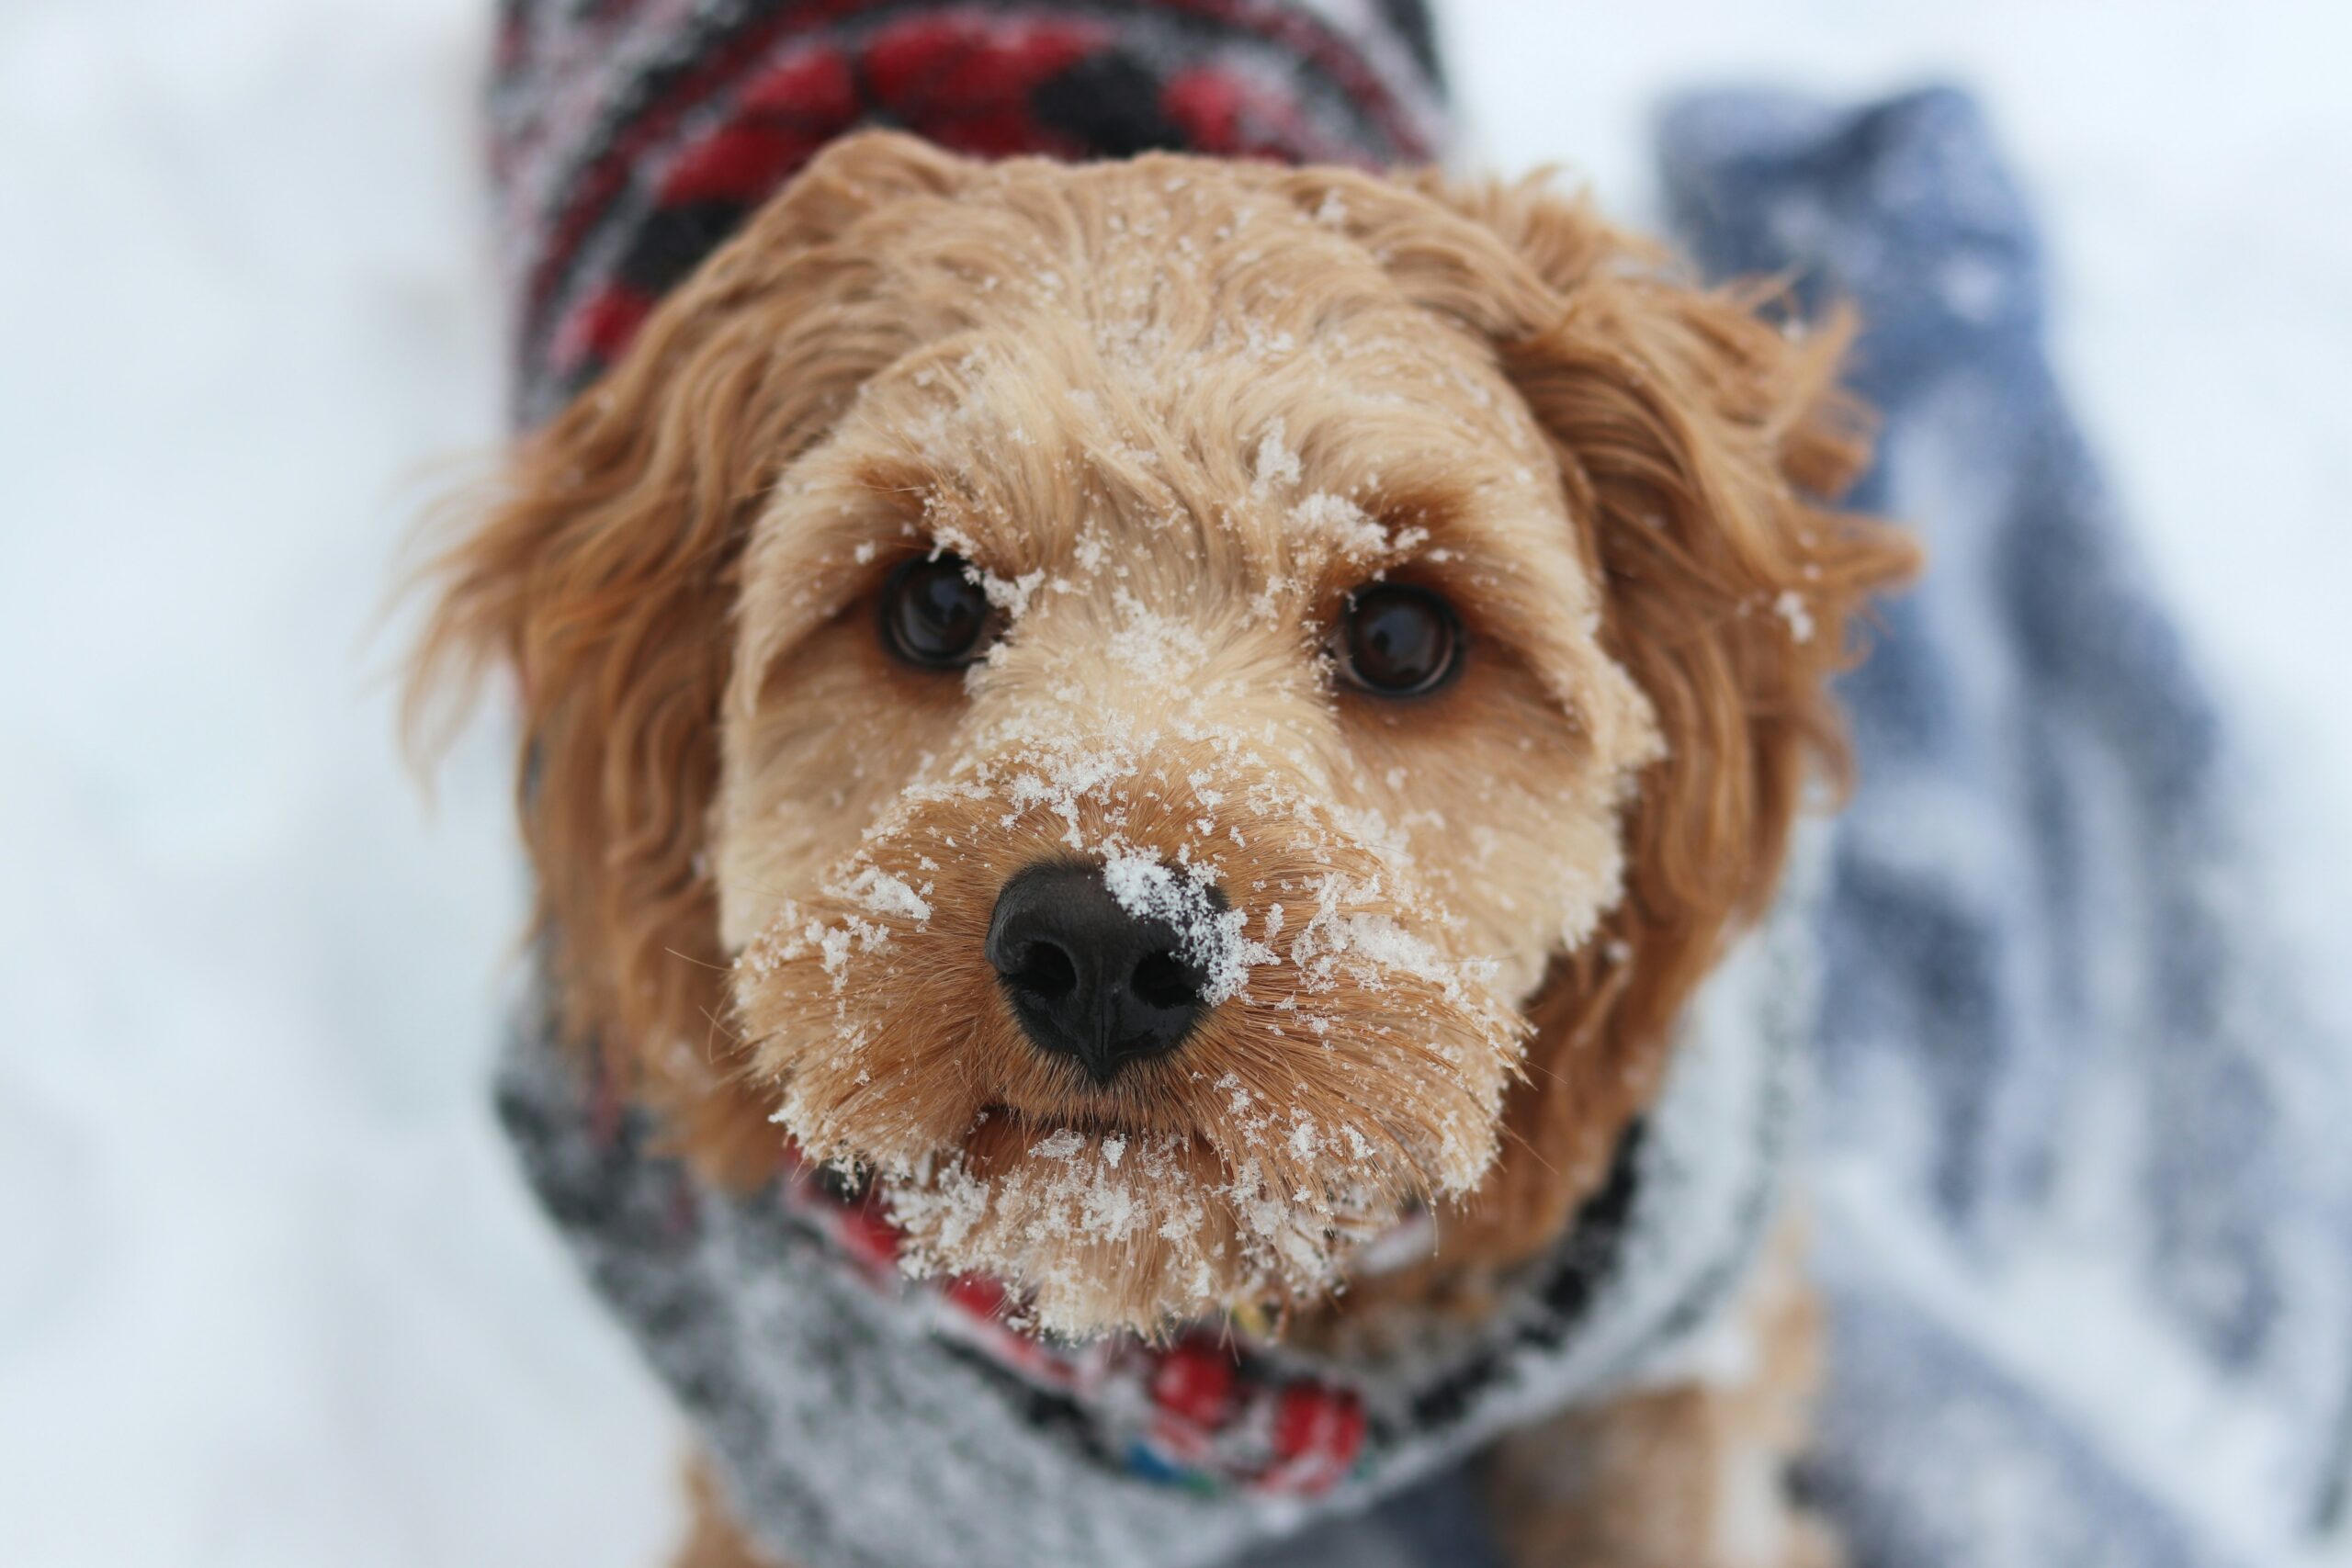 How to Spot Hypothermia in Pets